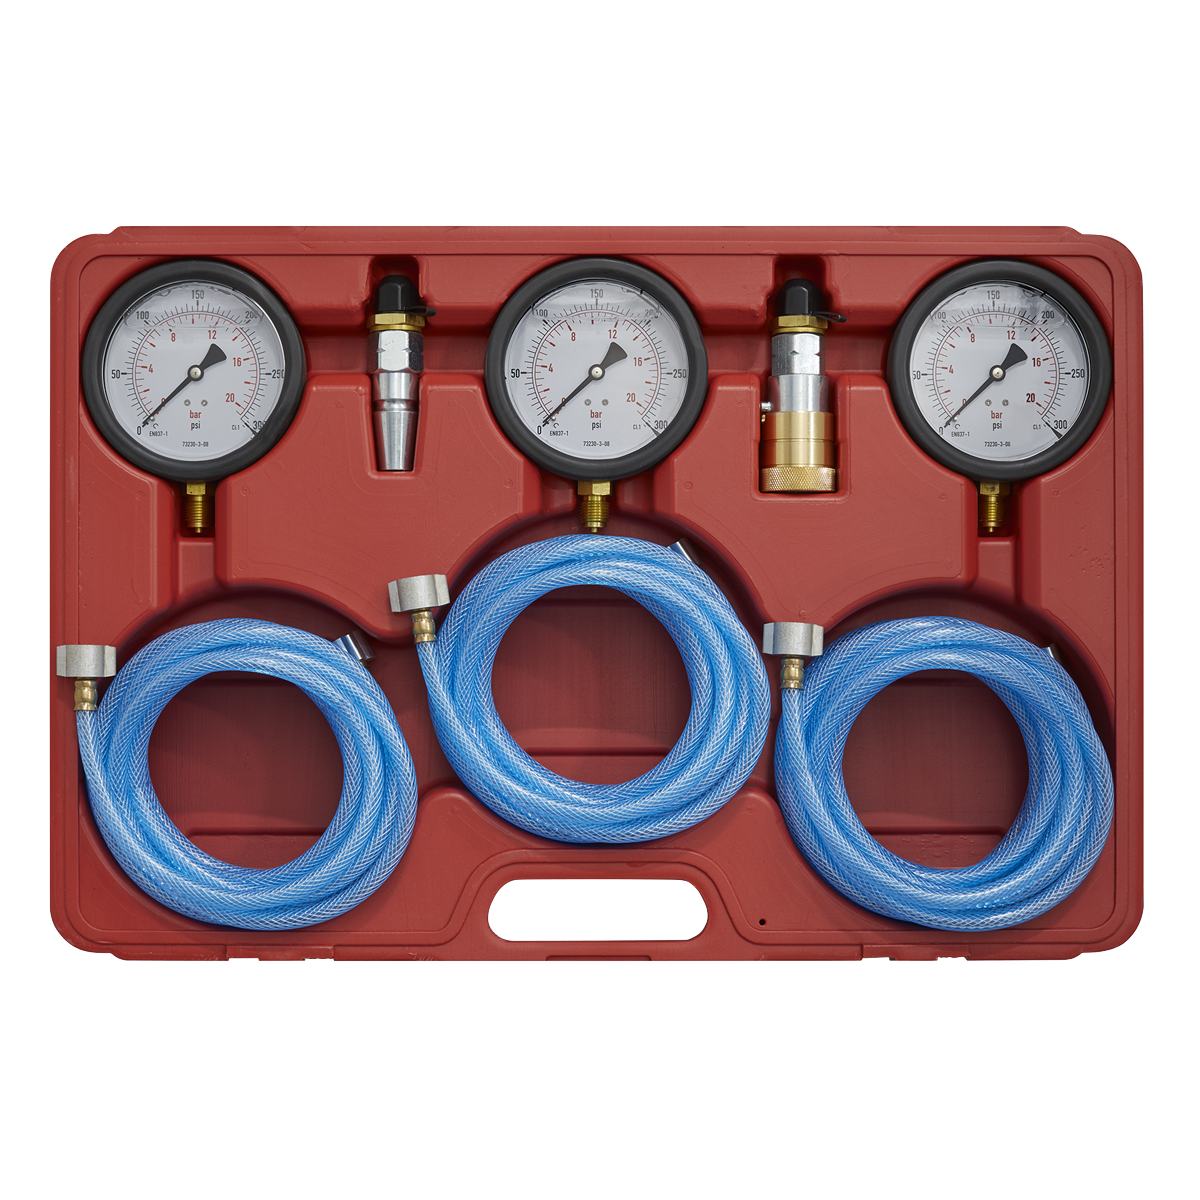 Three gauges provide more accurate diagnosis when testing and locating faults along the braking system.